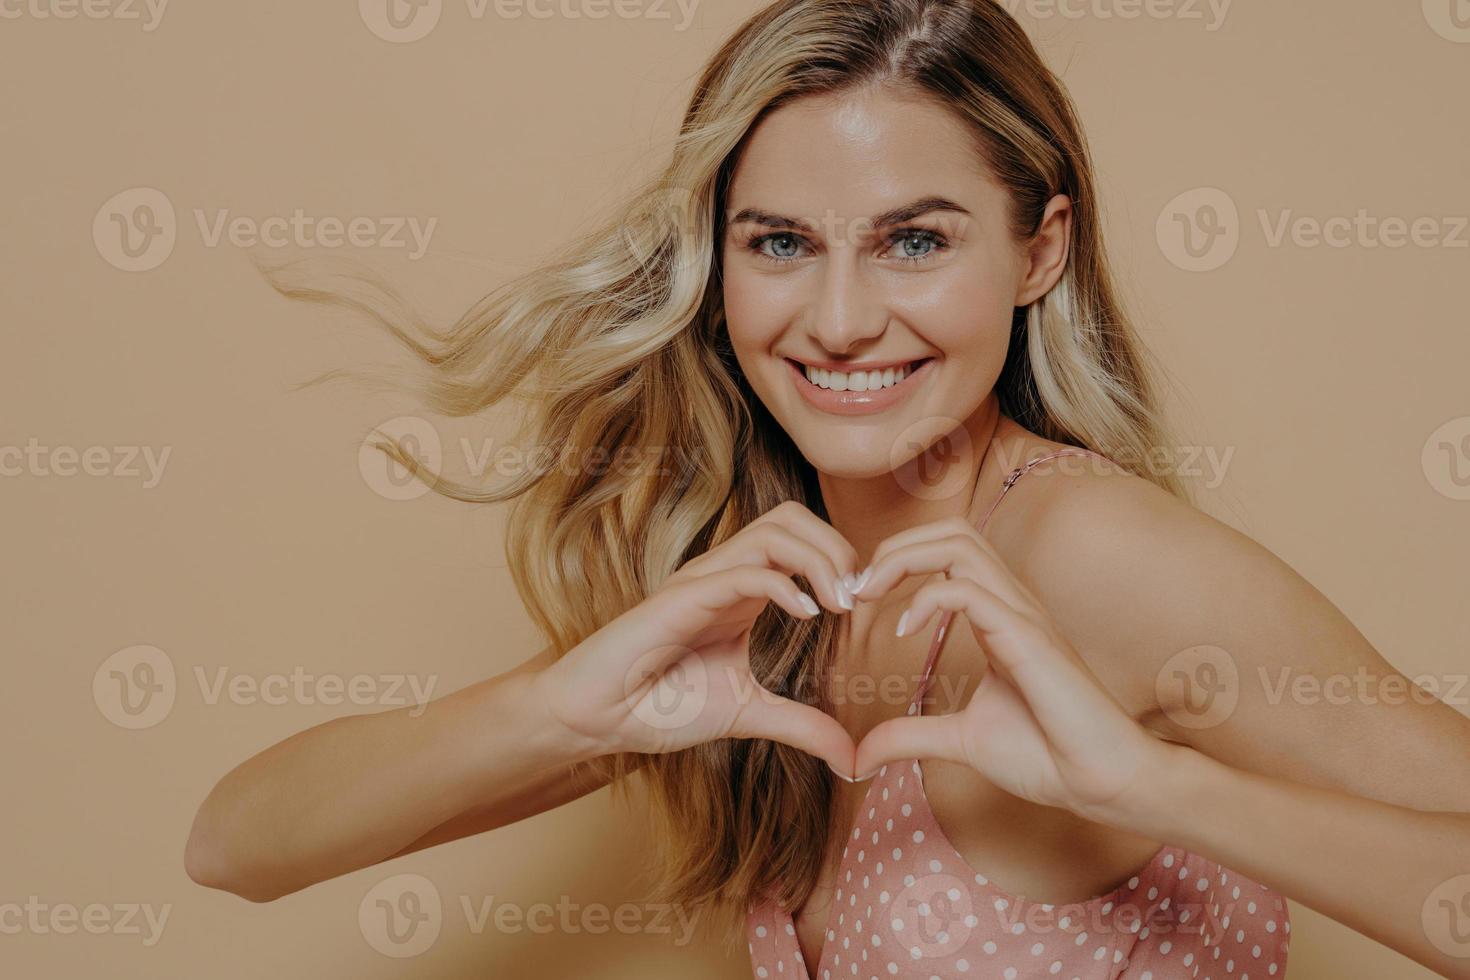 Blonde woman making heart shape with her hands photo